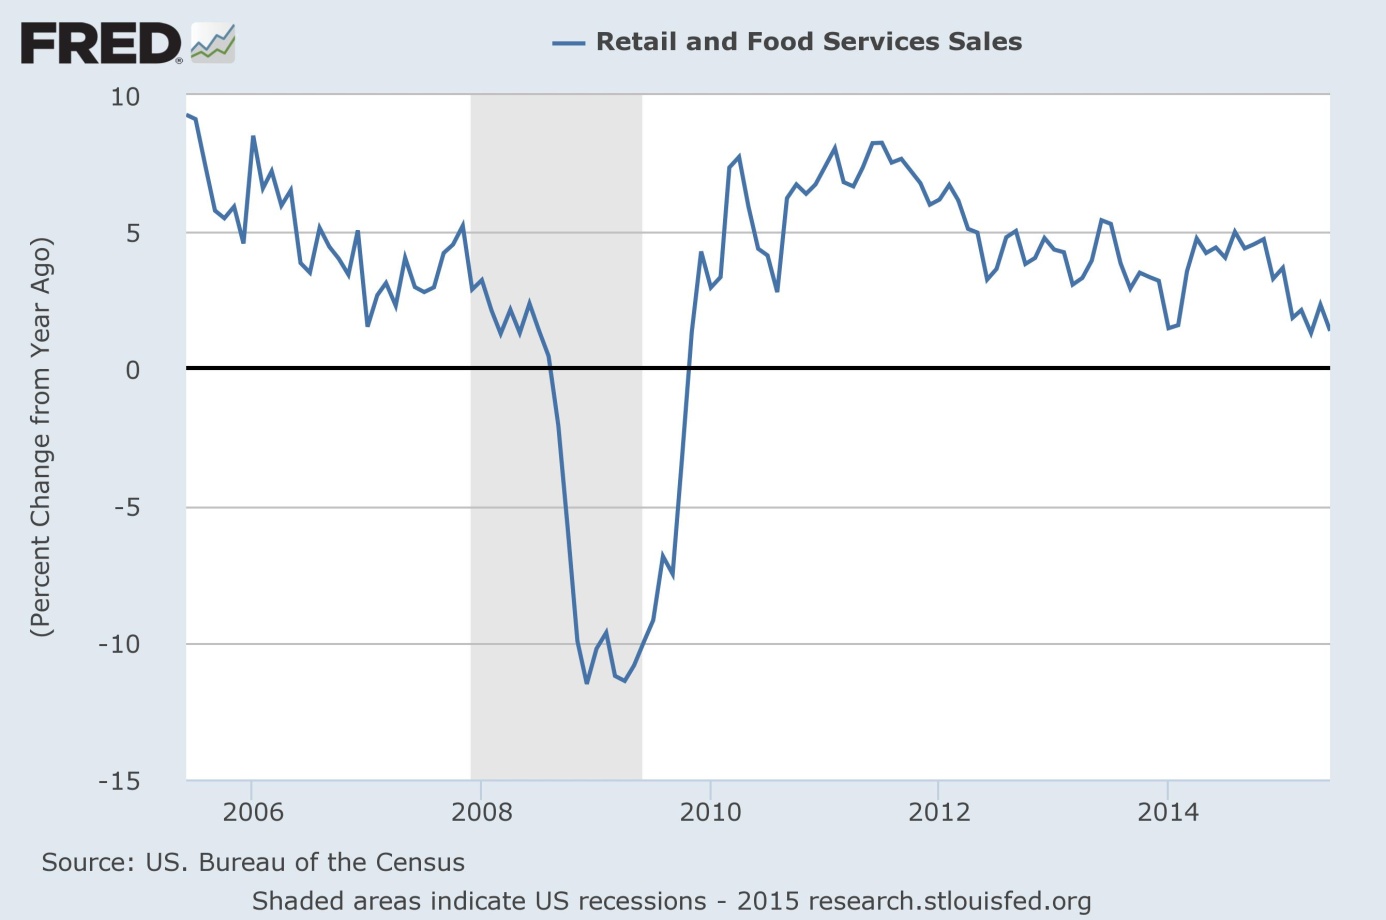 Retail and Food Services Sales (percent change from year ago) between 2005 and 2015